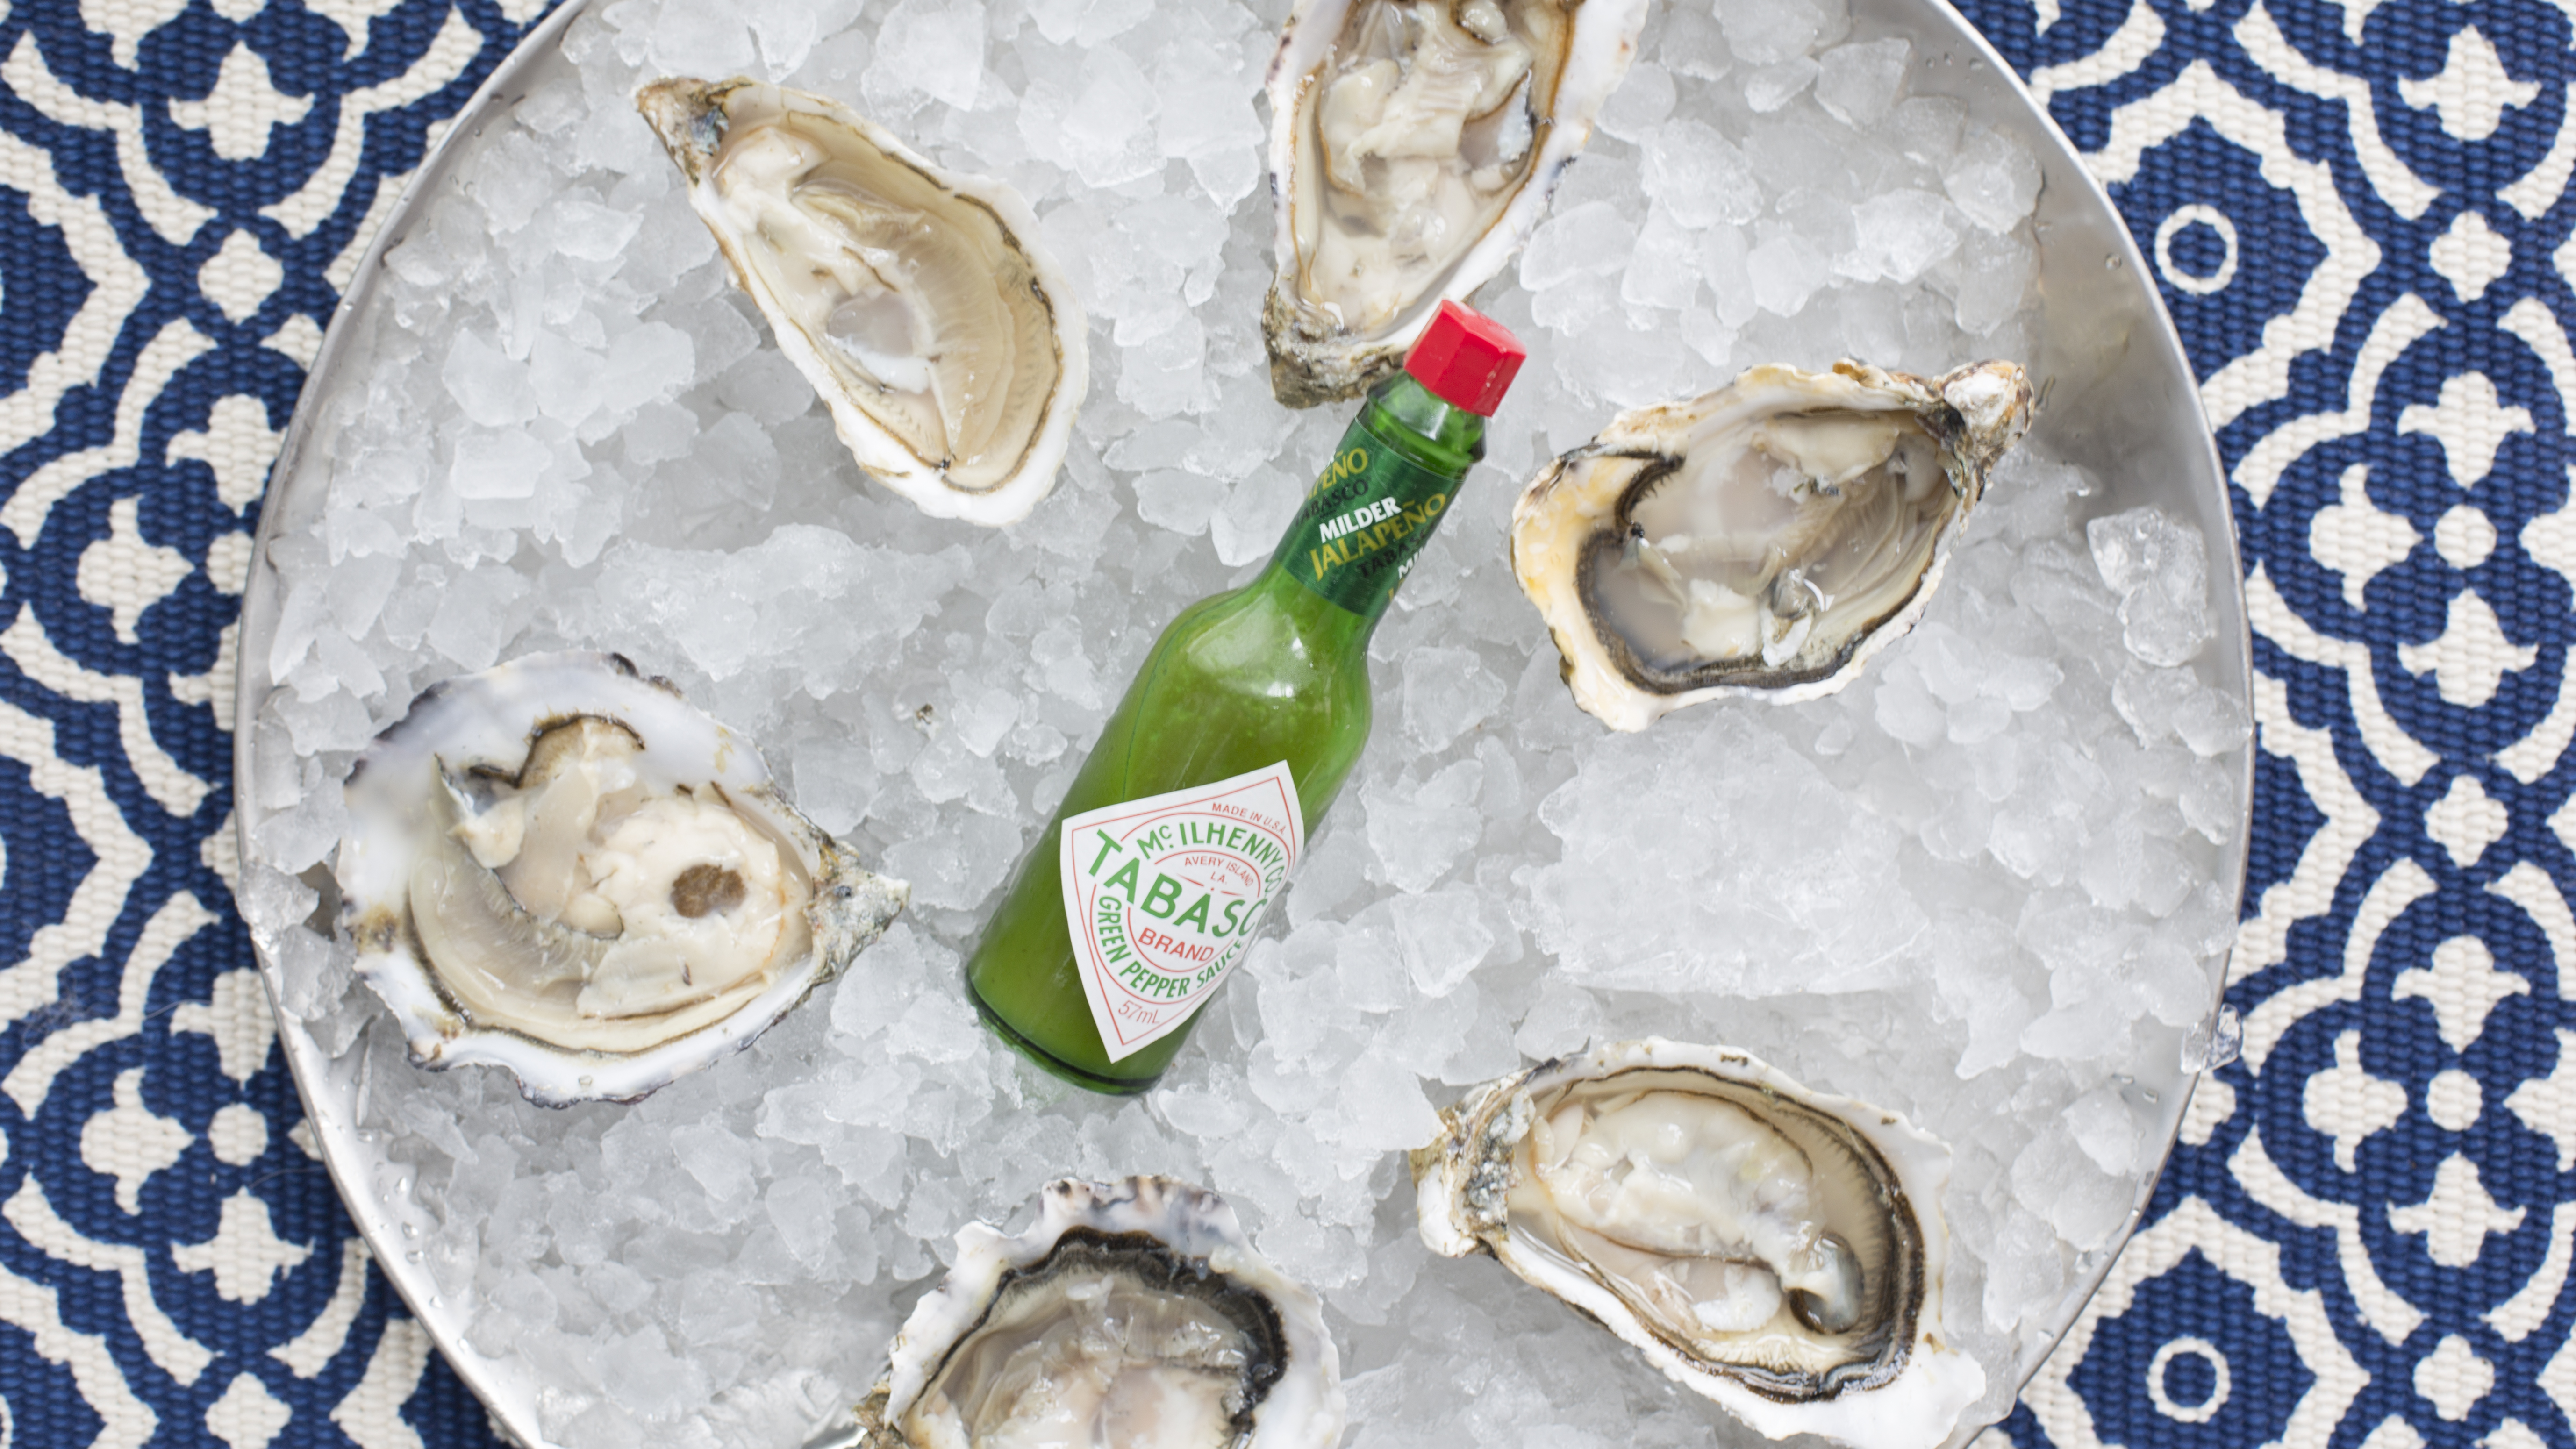 Tabasco and oysters are classic pair